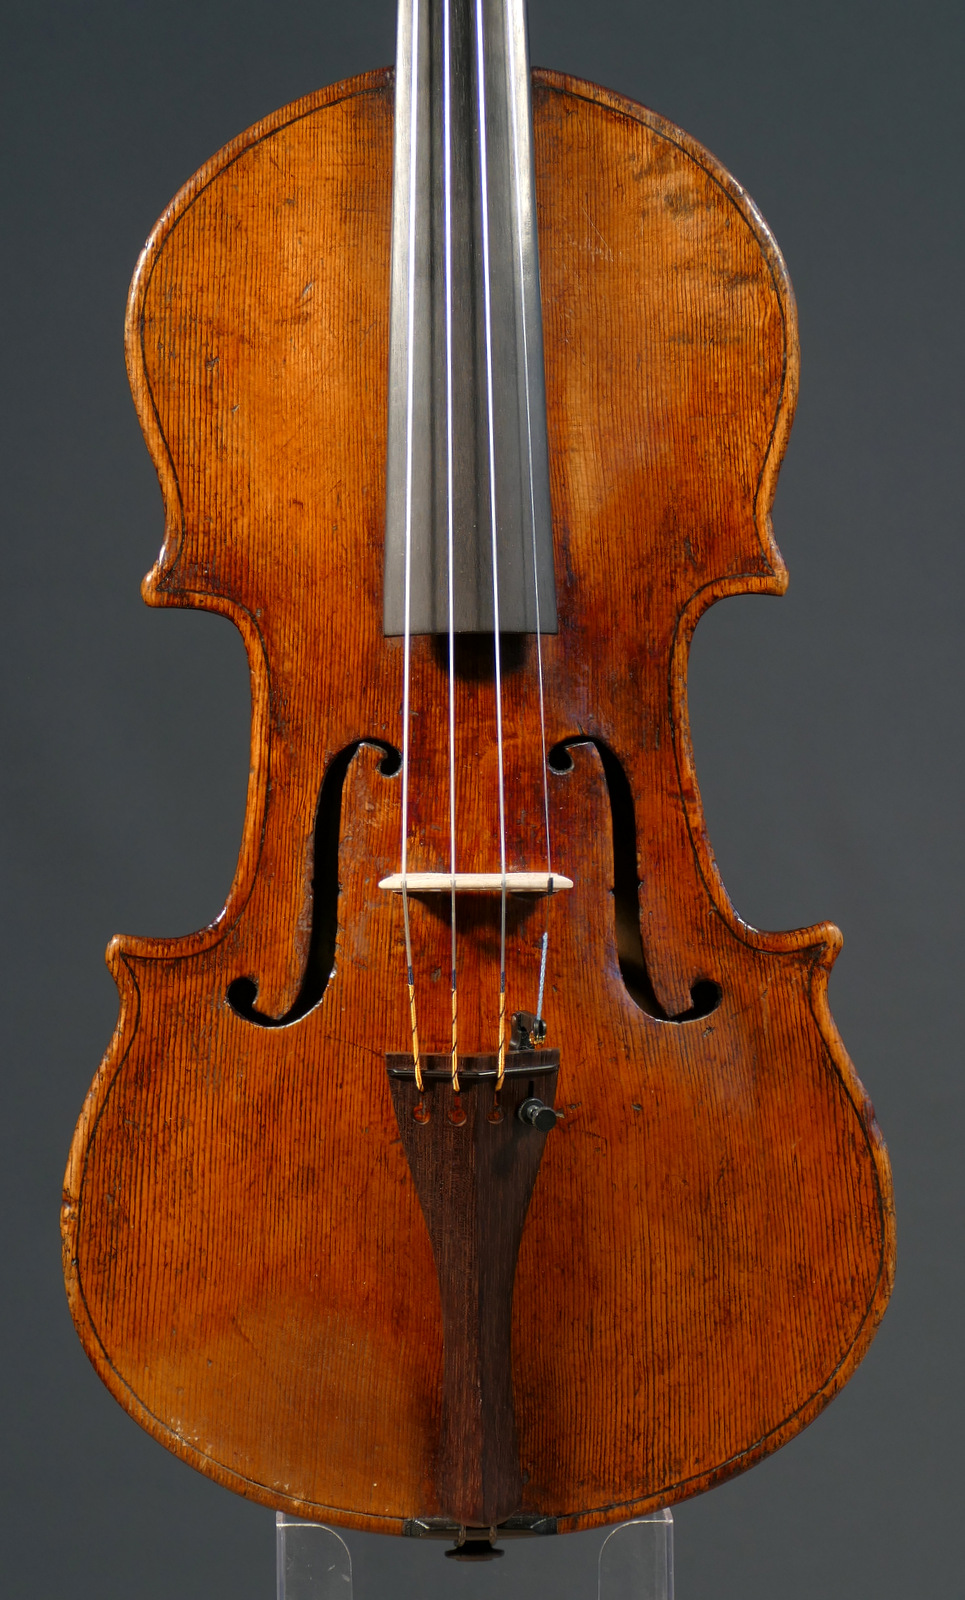 andrageren vision gammelklog Interesting Italian violin from the Marches around 1850